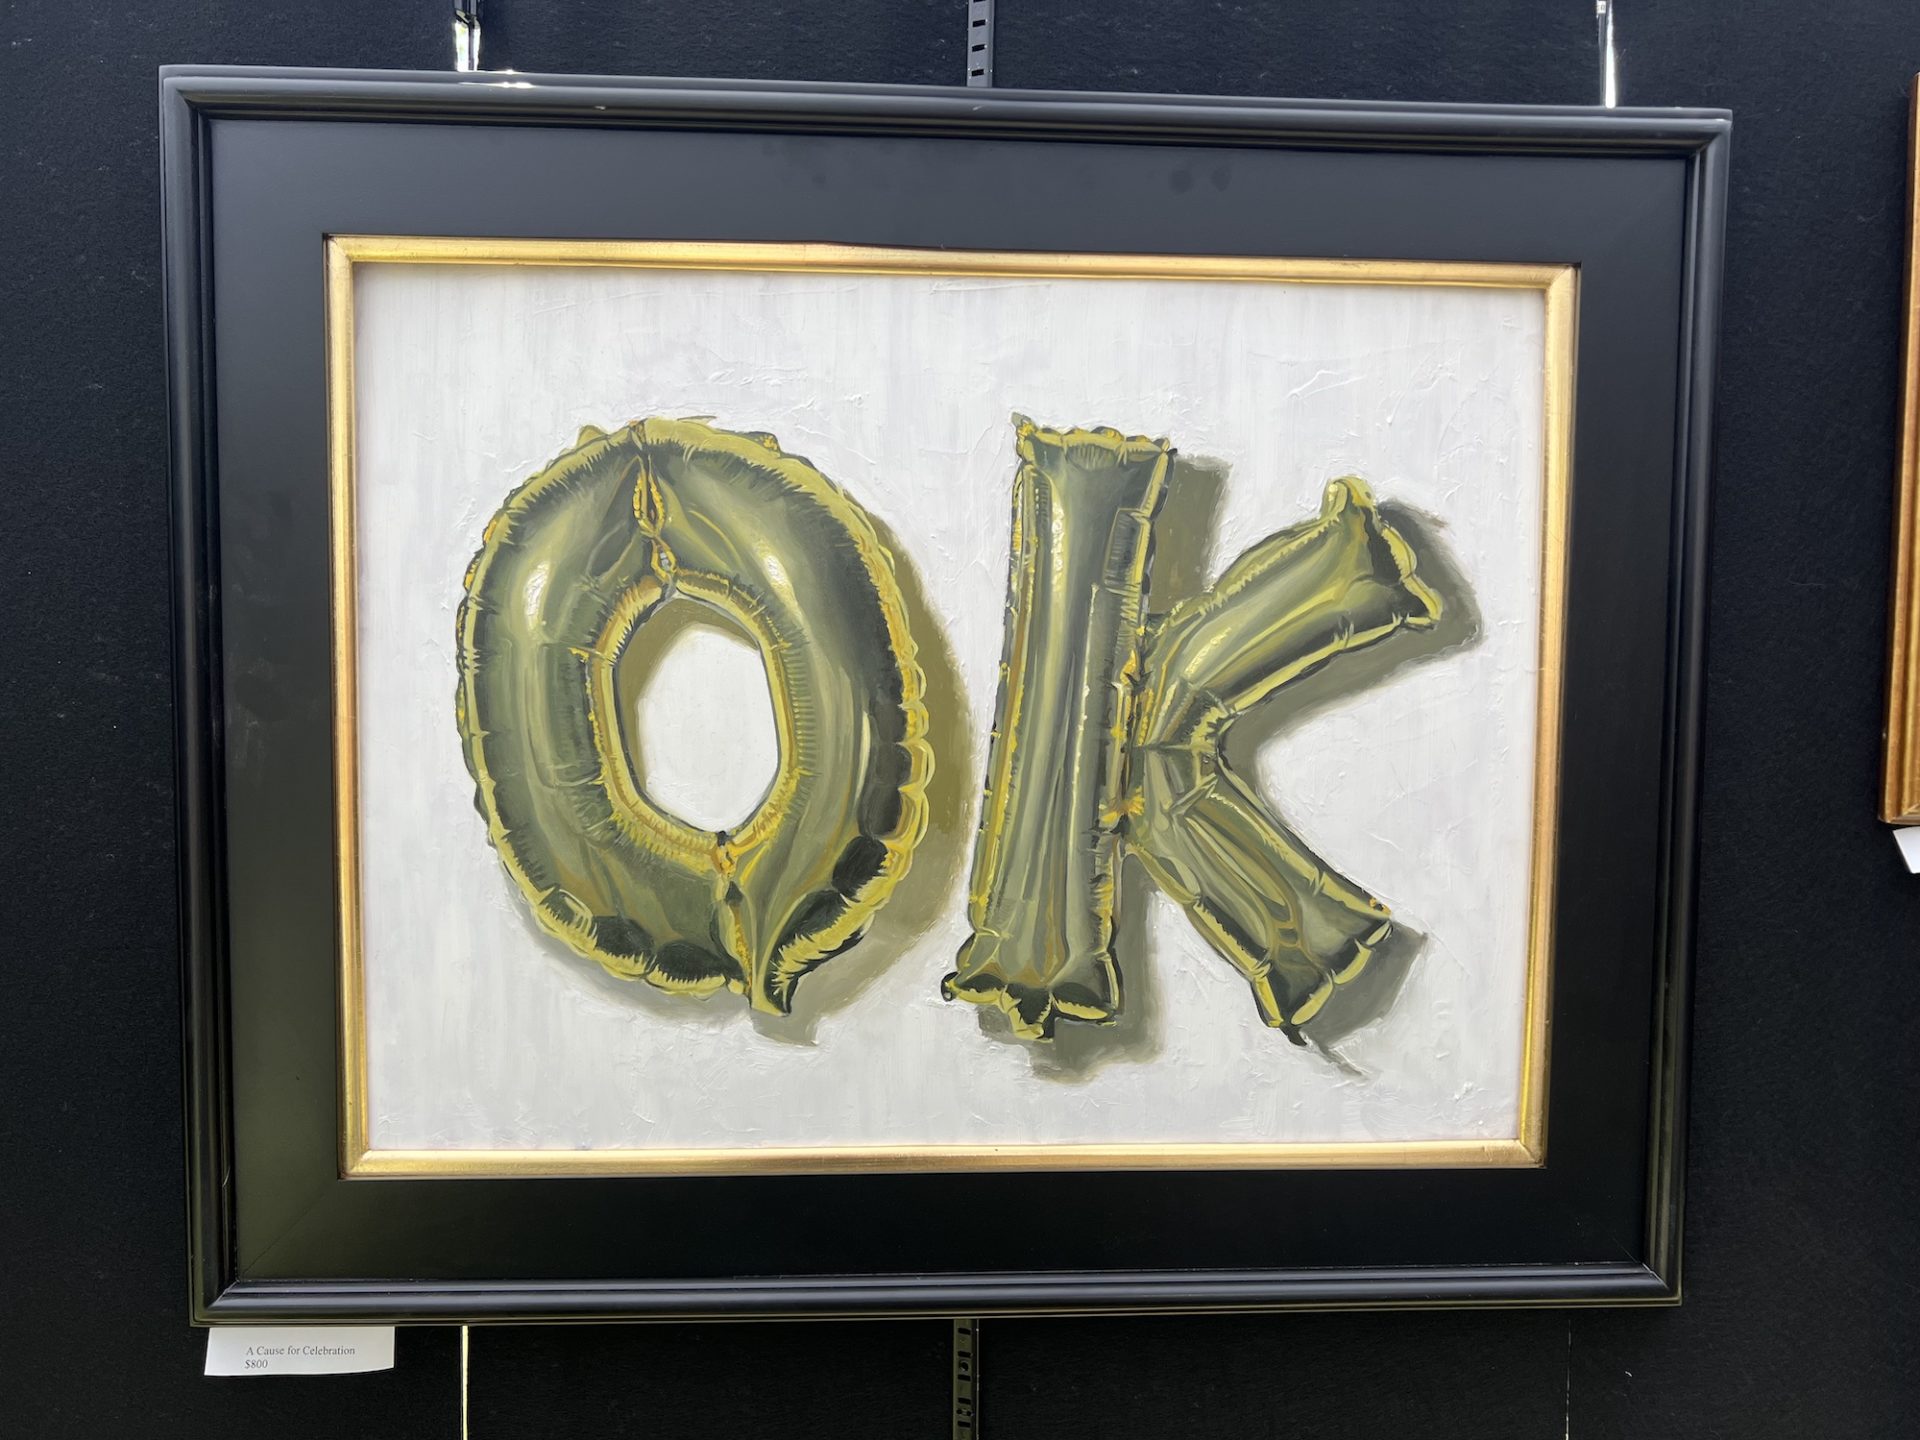 realist painting of gold letter balloons spelling "OK" in a black frame